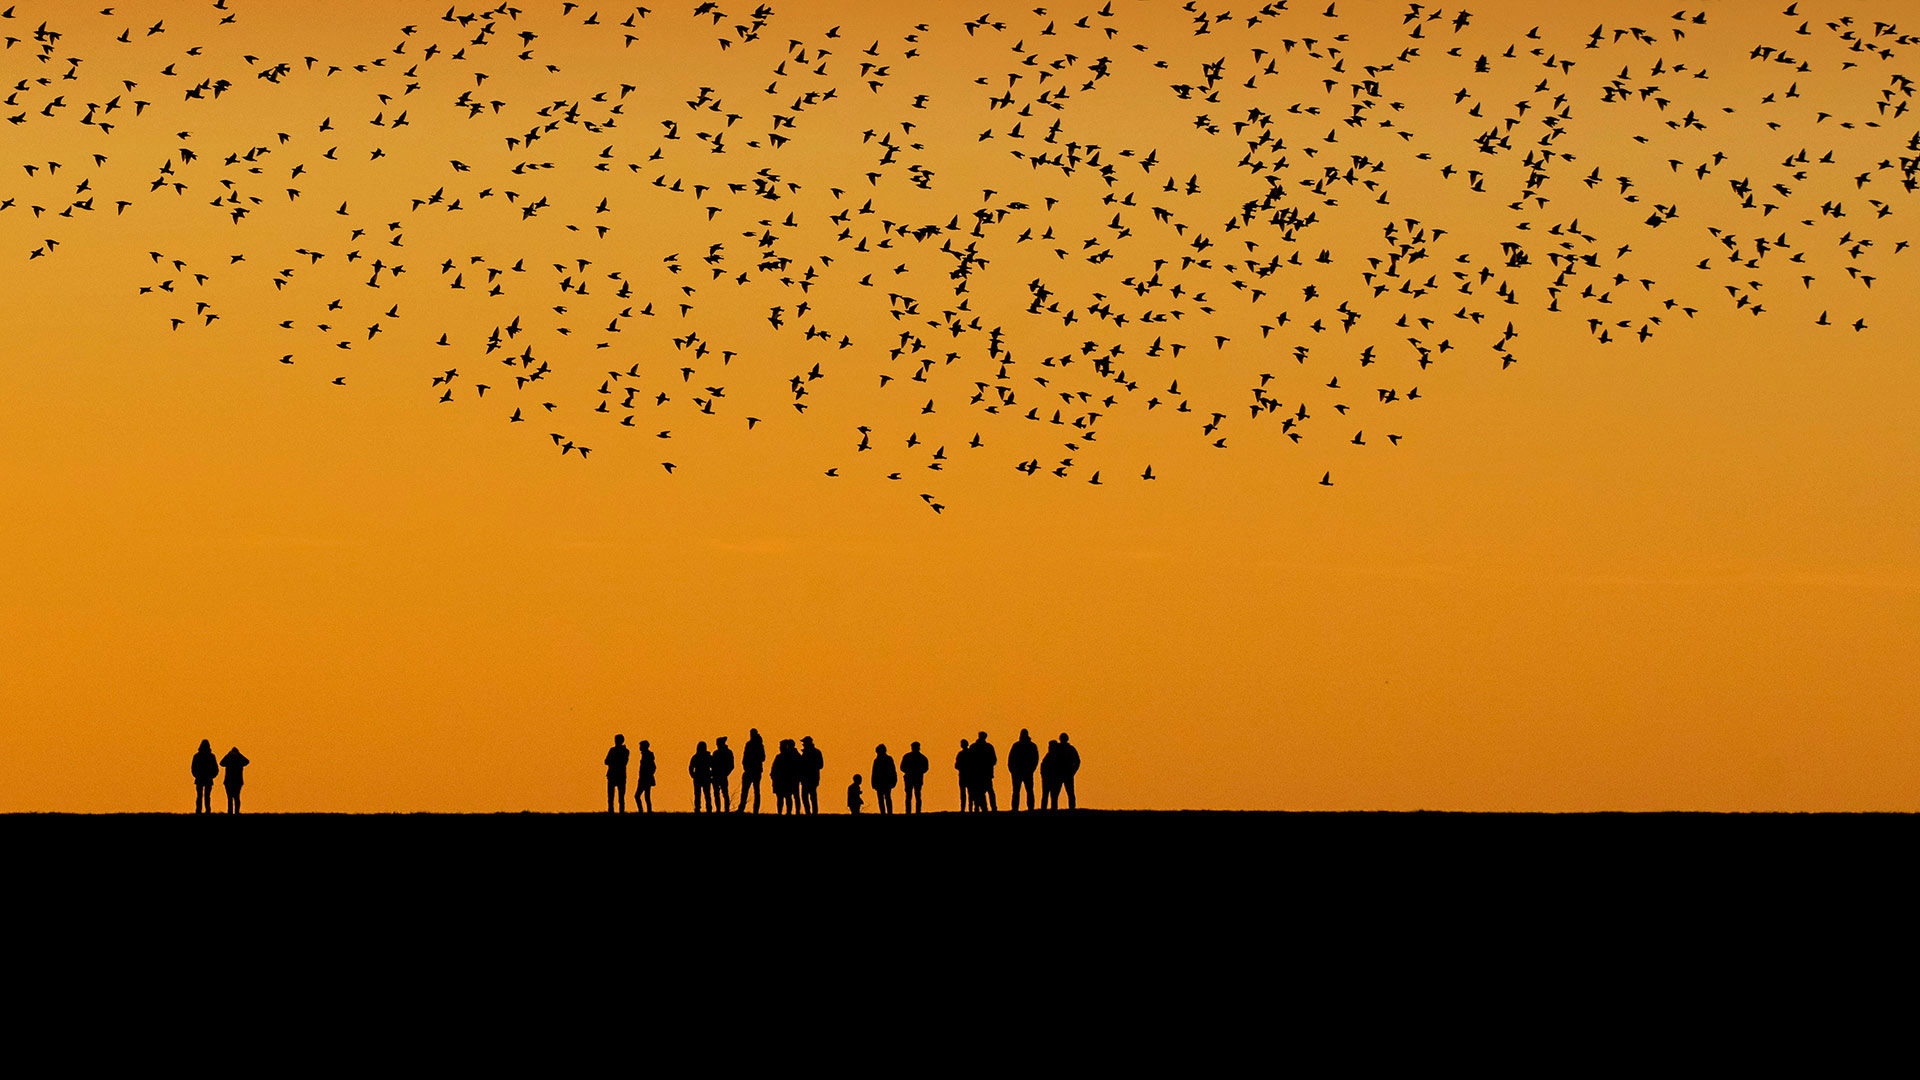 Starlings in the wetlands between Denmark and Germany - Viking/Alamy)